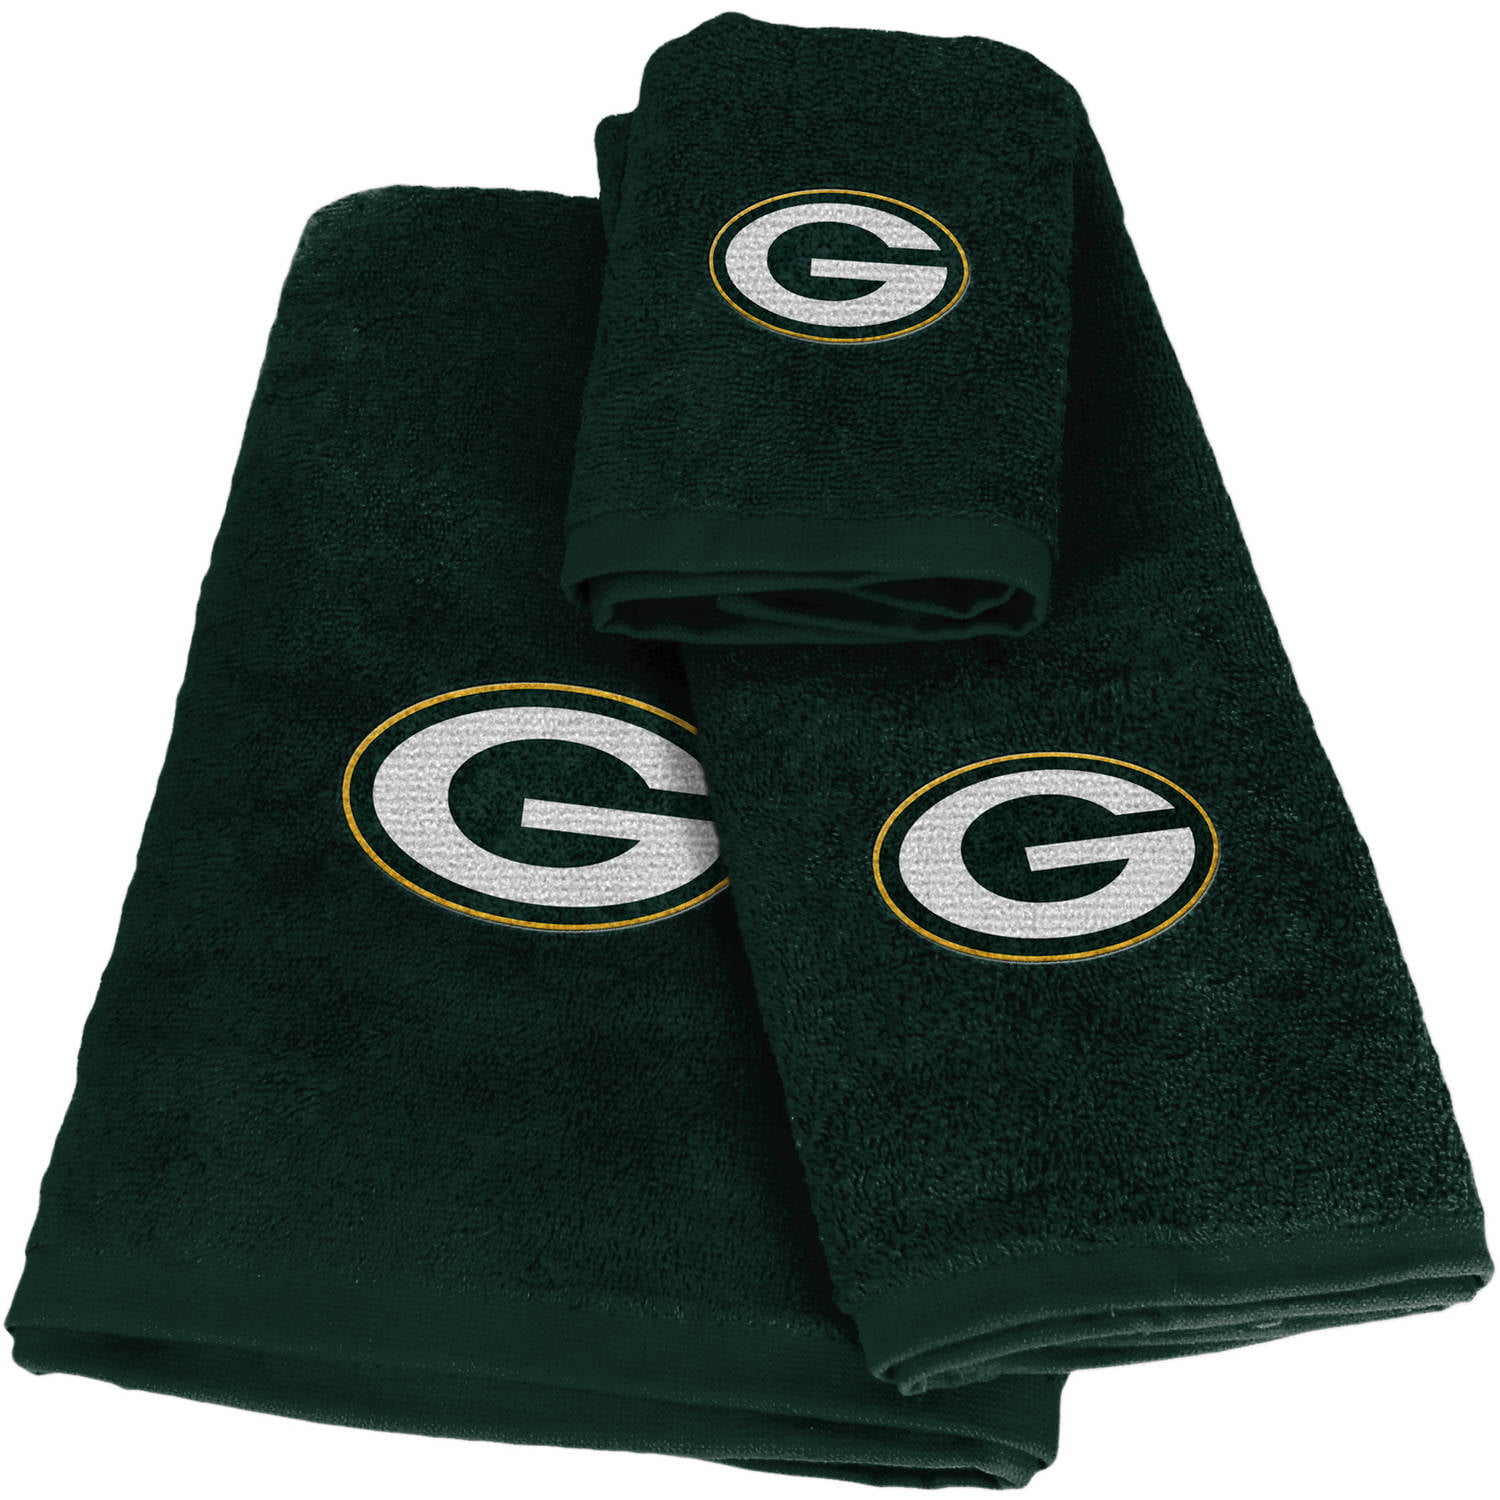 Master Industries Green Bay Packers Sublimated Cotton Towel 16 x 25